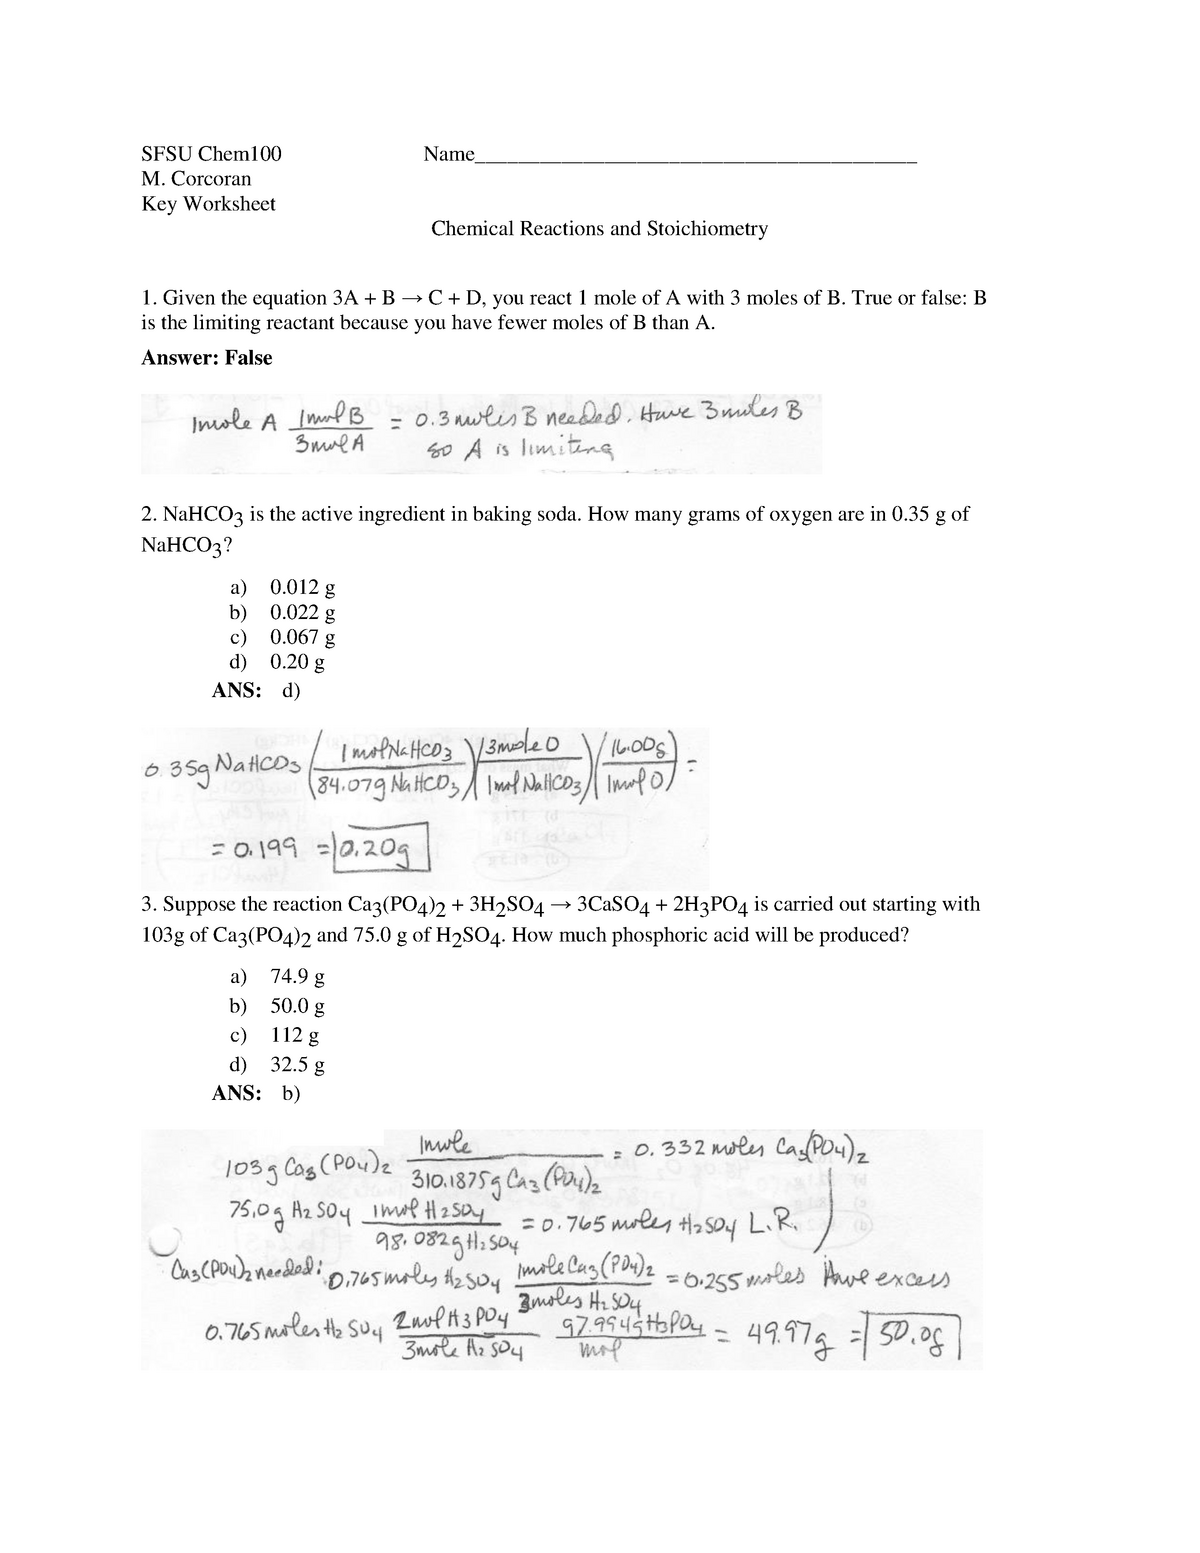 Key Worksheet - Chemical Reactions And Stoichiometry - With Pertaining To Stoichiometry Problems Worksheet Answers